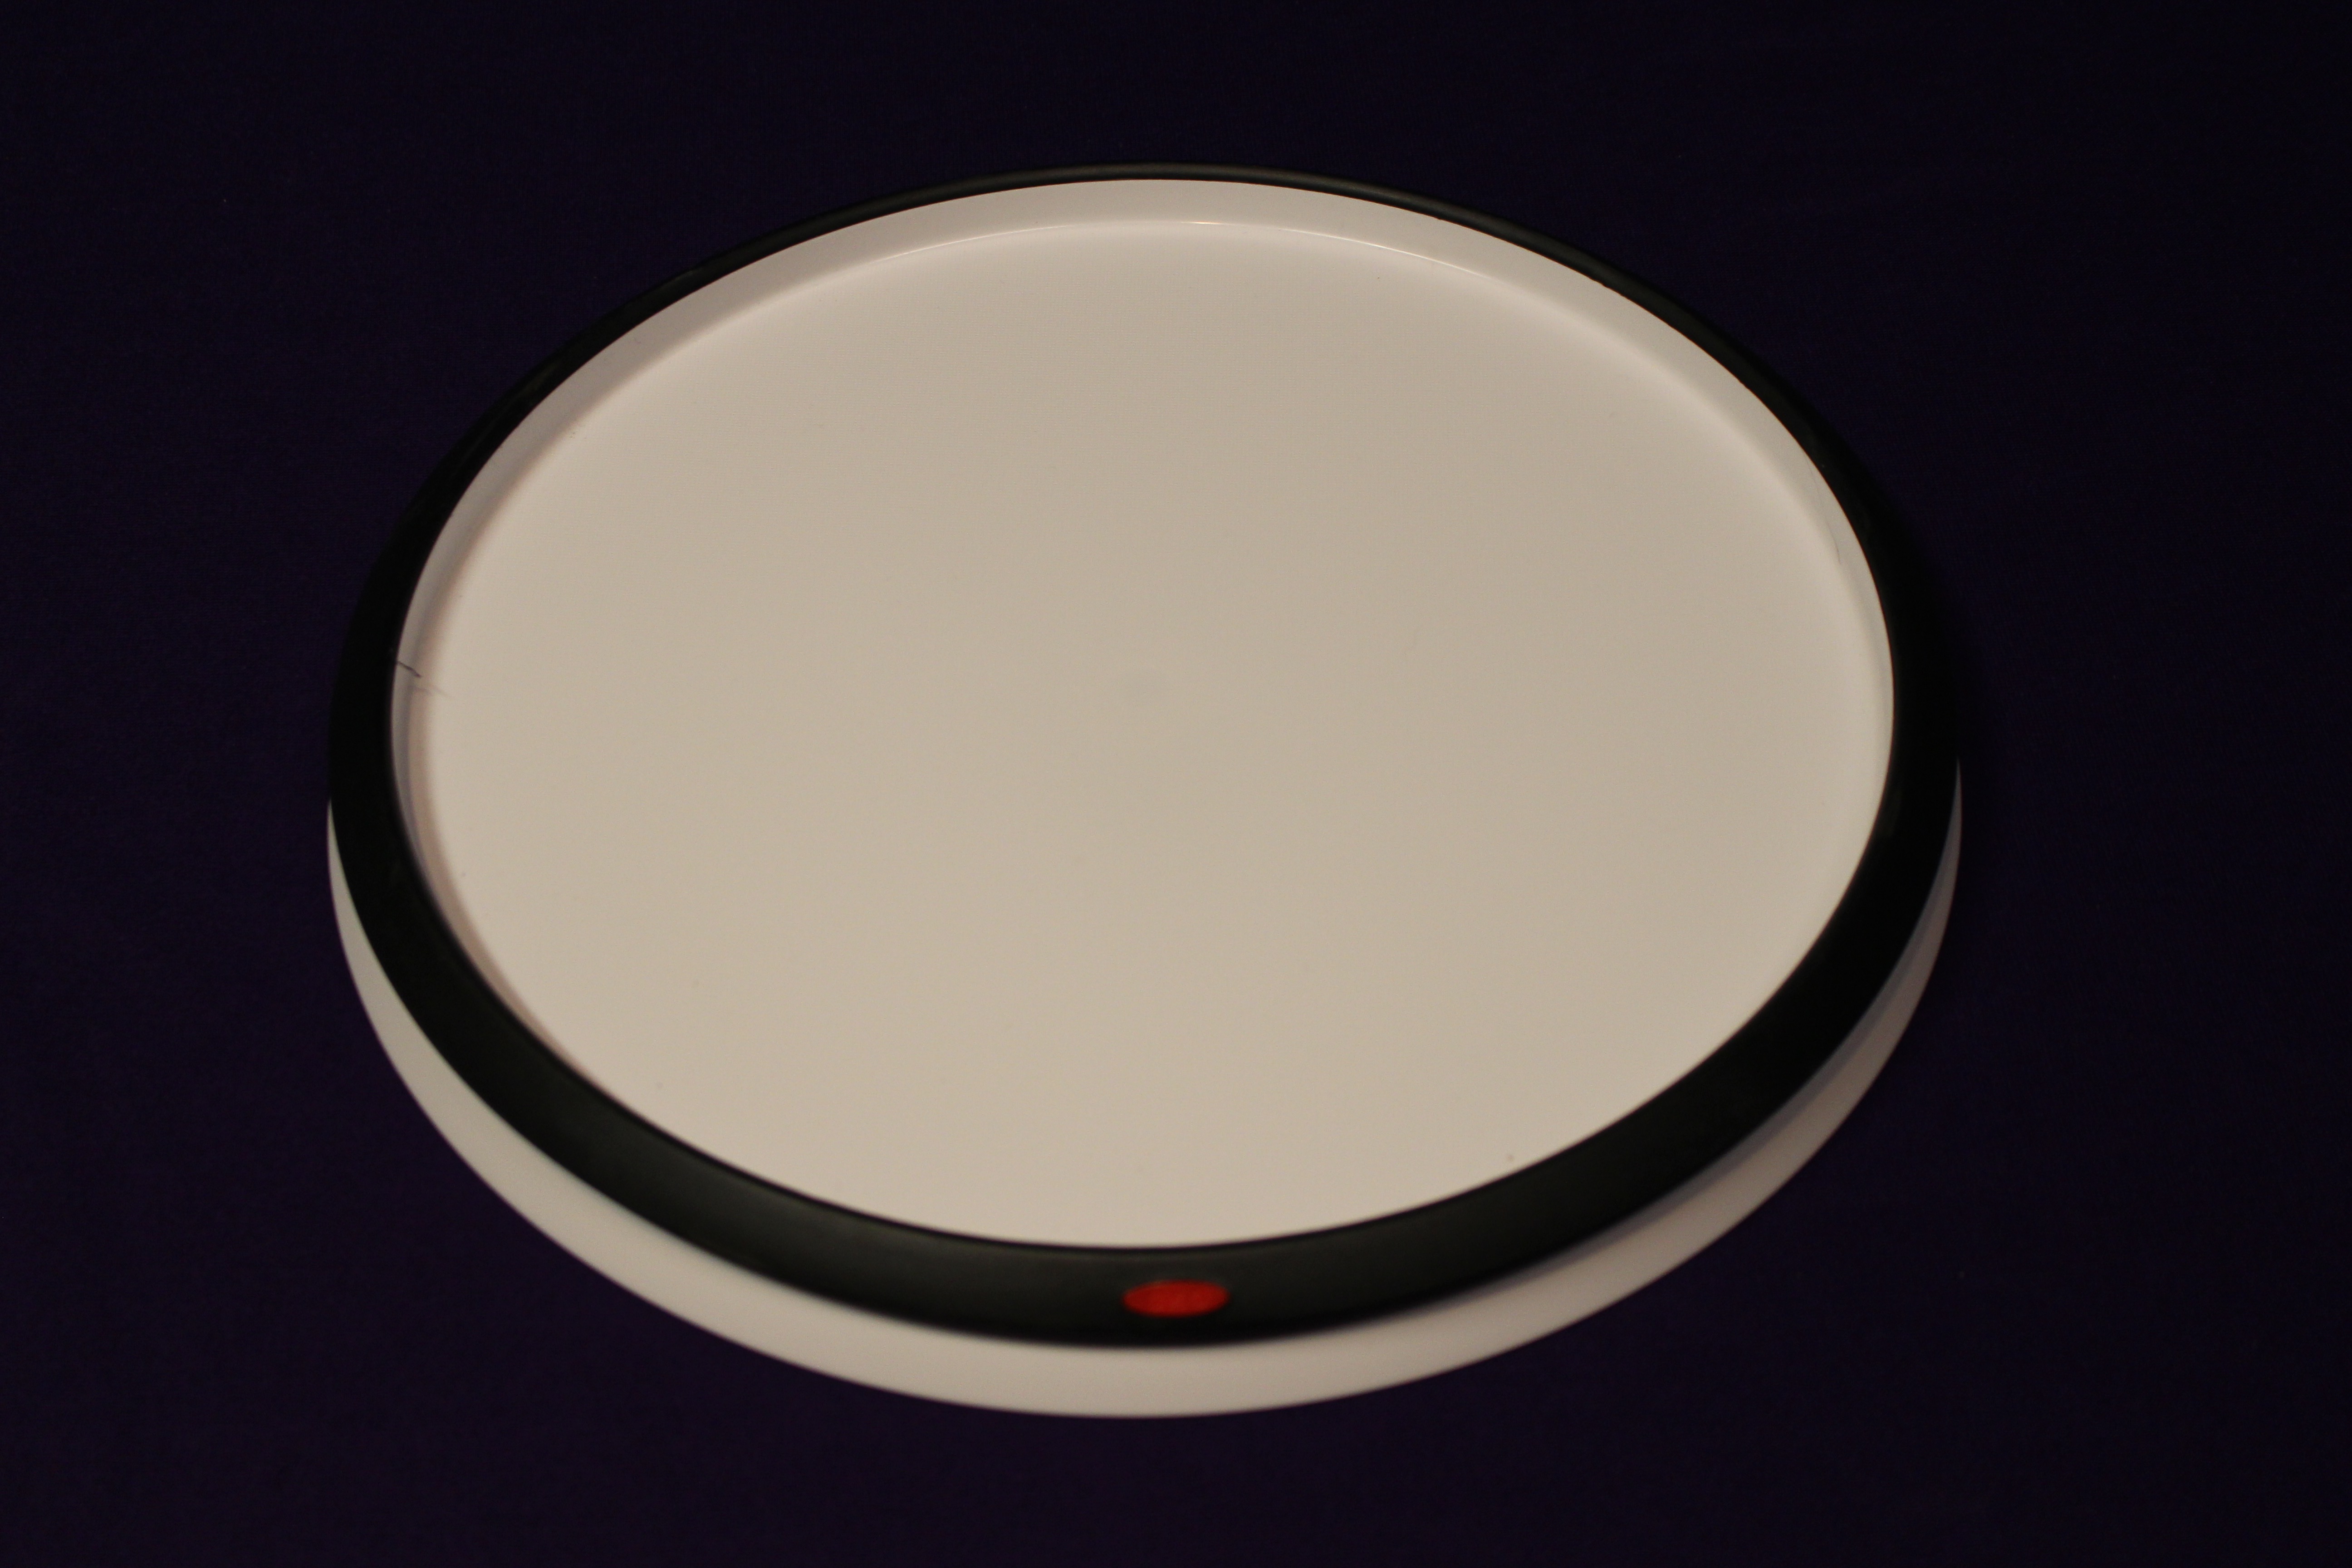 OXO table seen from angled overhead view